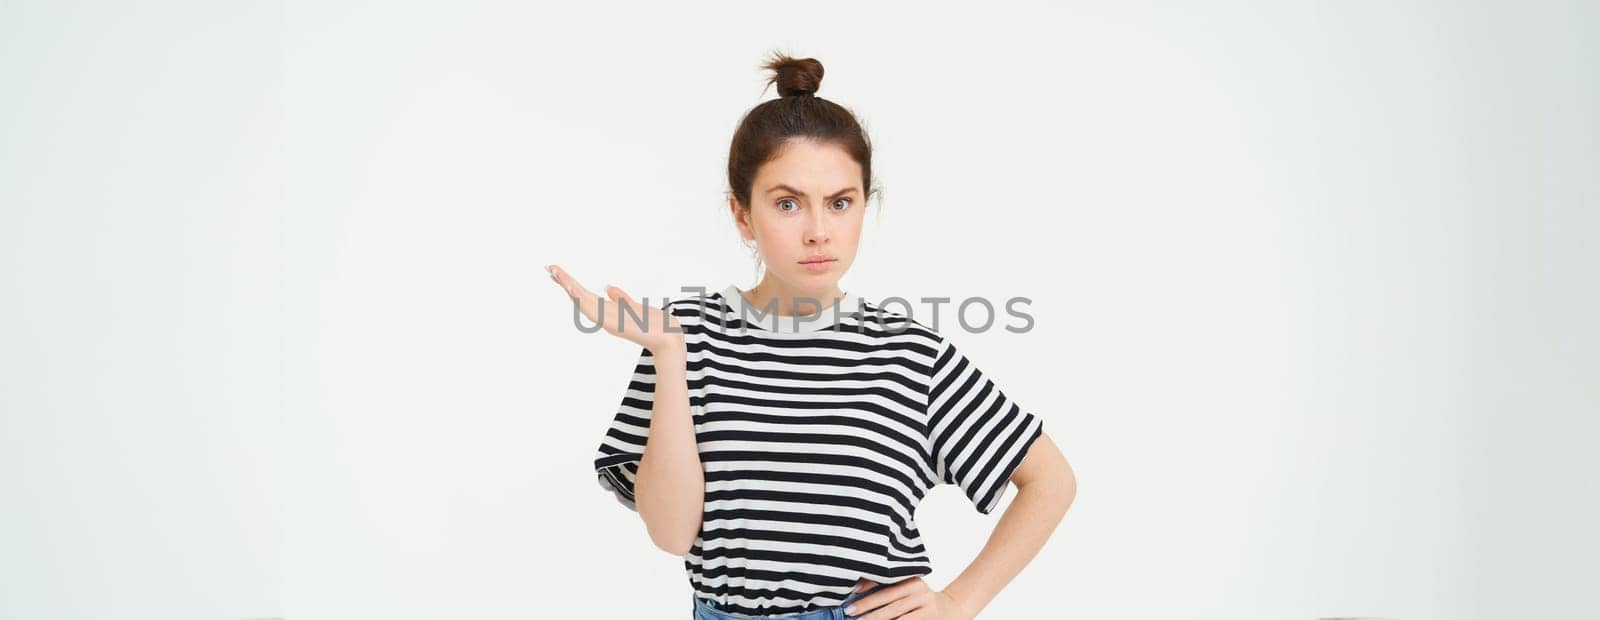 Portrait of confused girl, shrugging should and raising one hand up, looks puzzled, cant understand something, standing over white background.